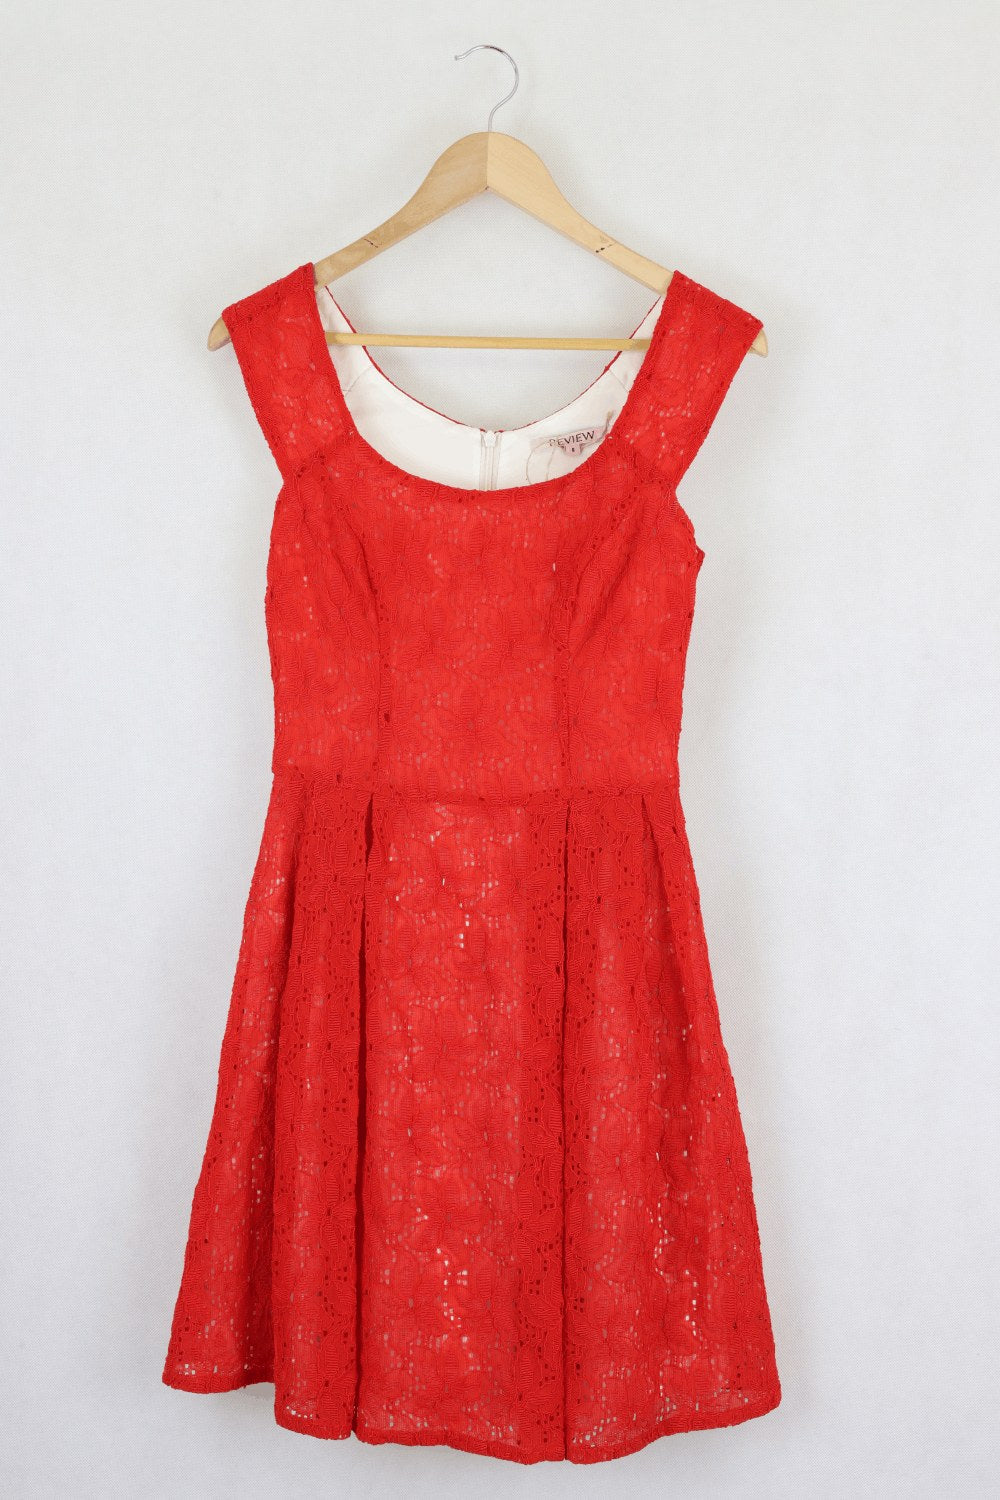 Review Red Dress 8